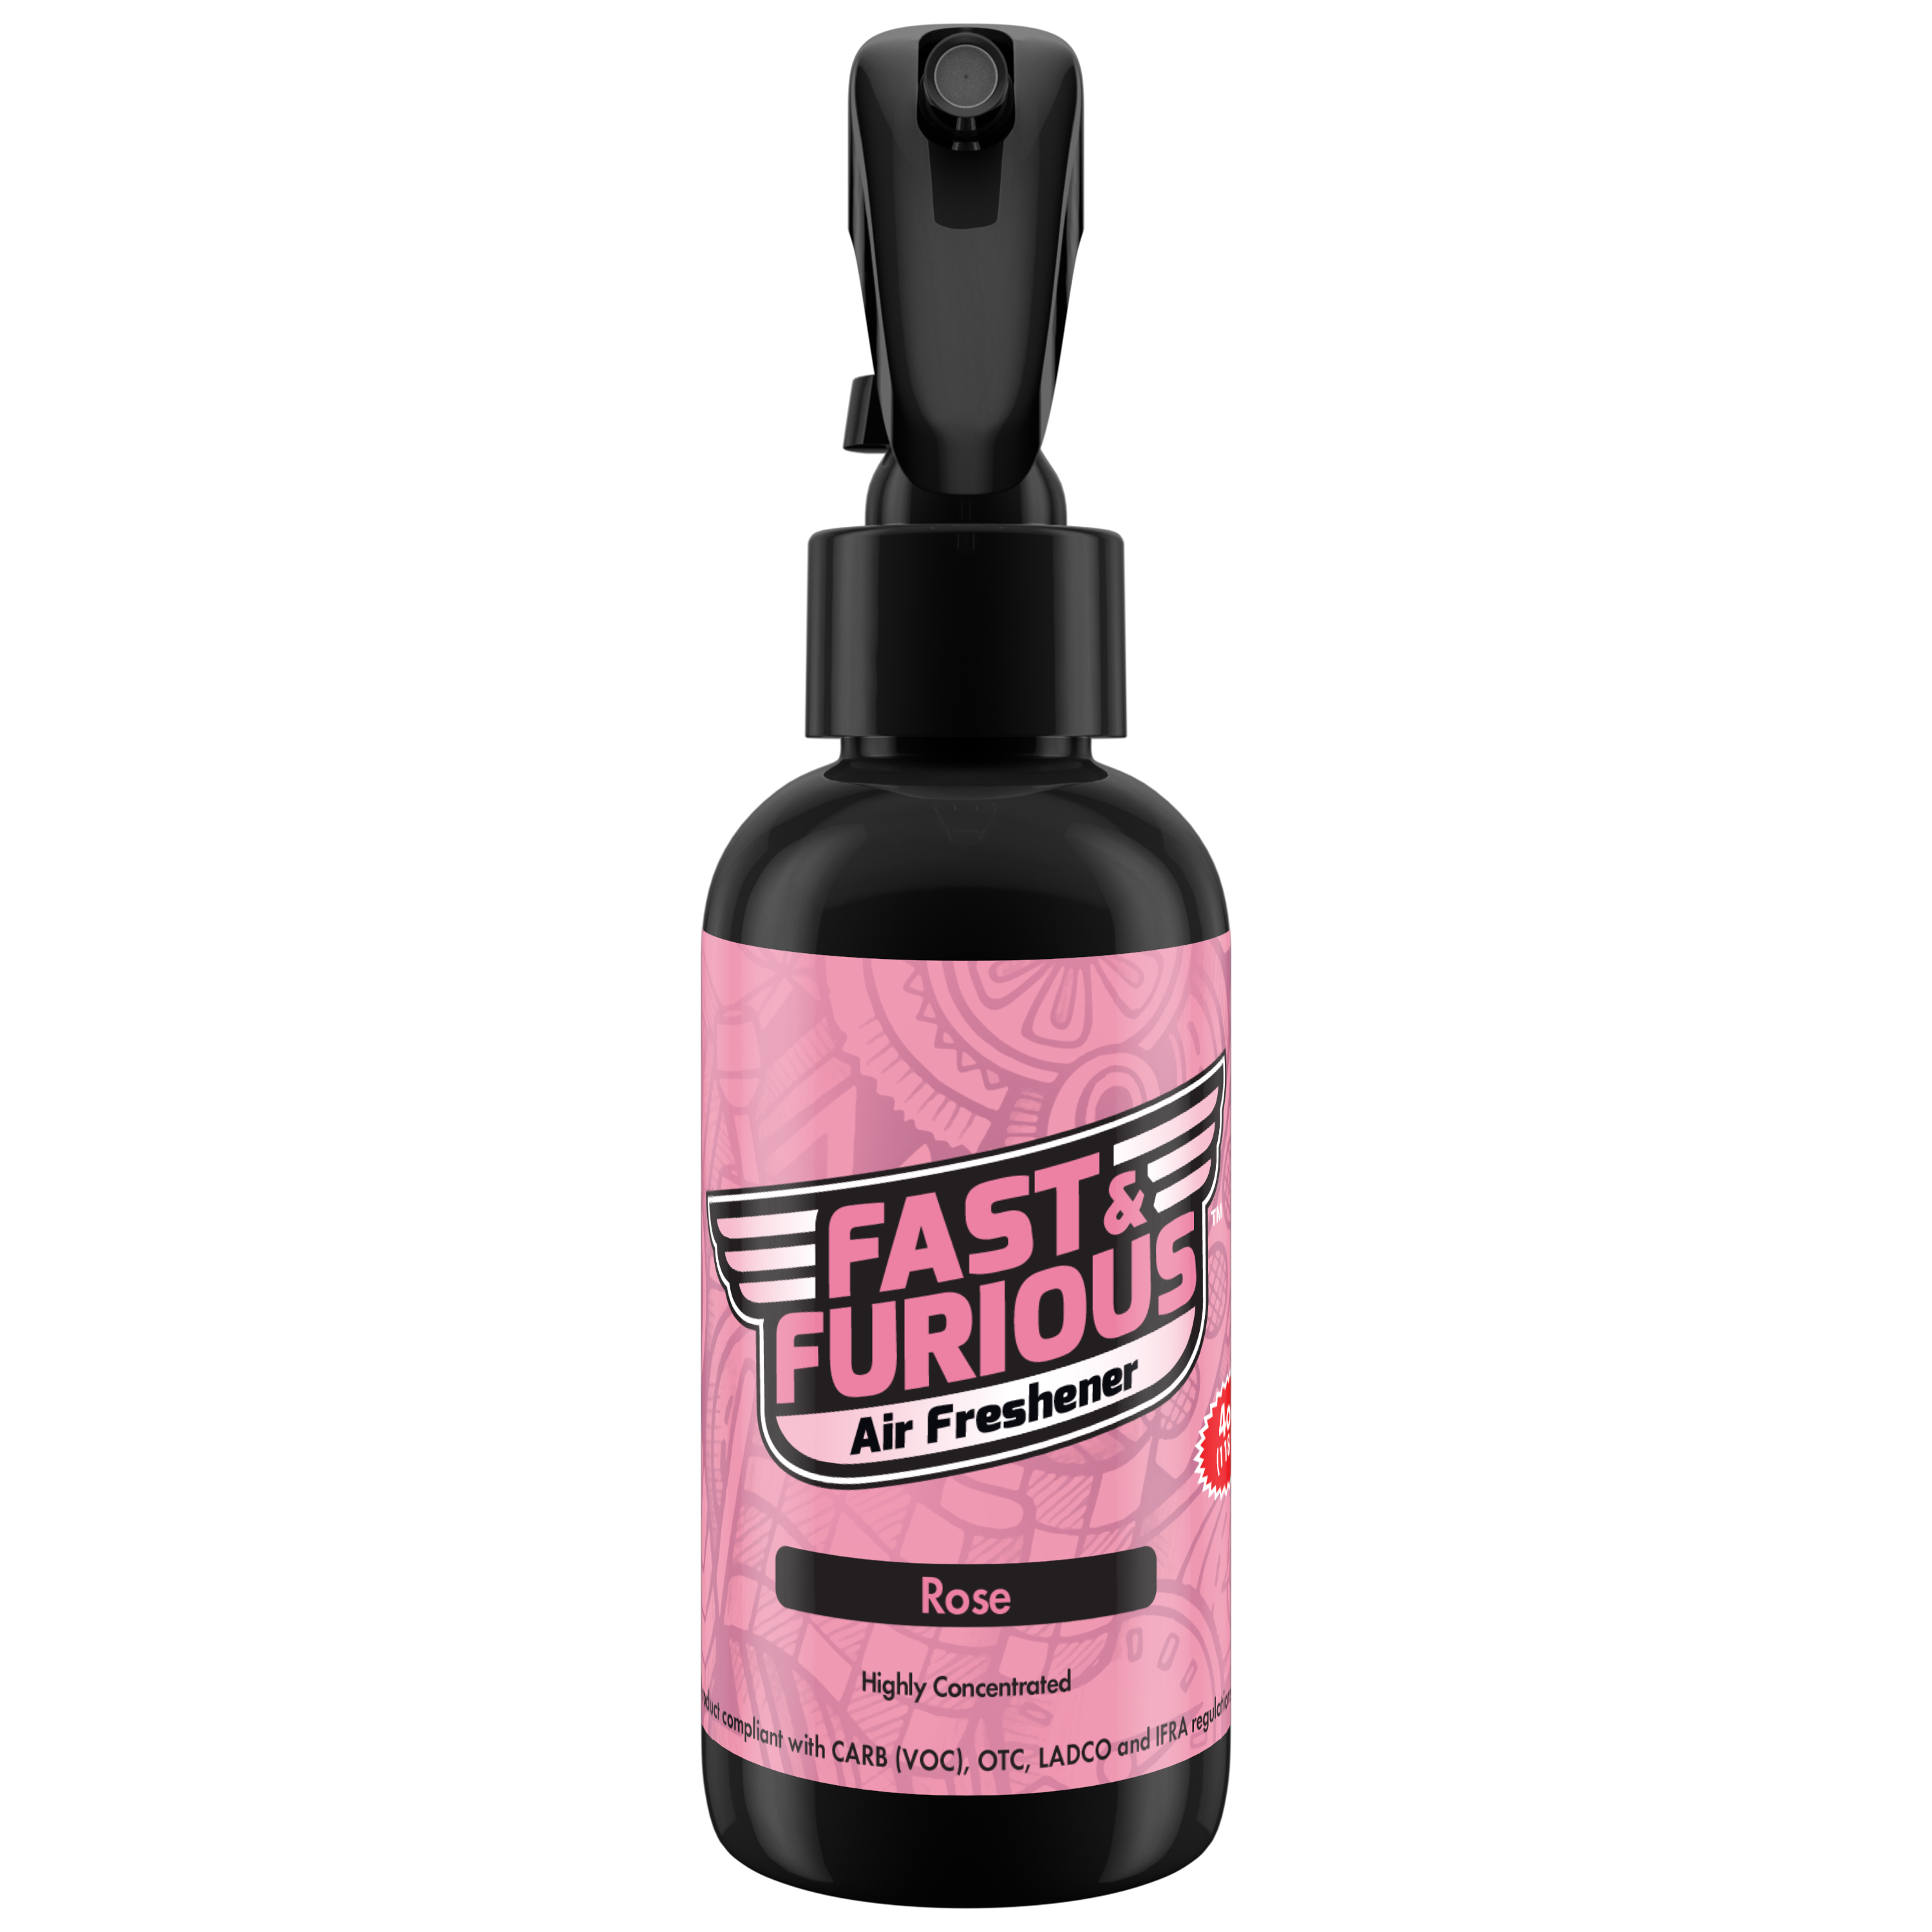 Fast and Furious Air Freshener - Rose Scent